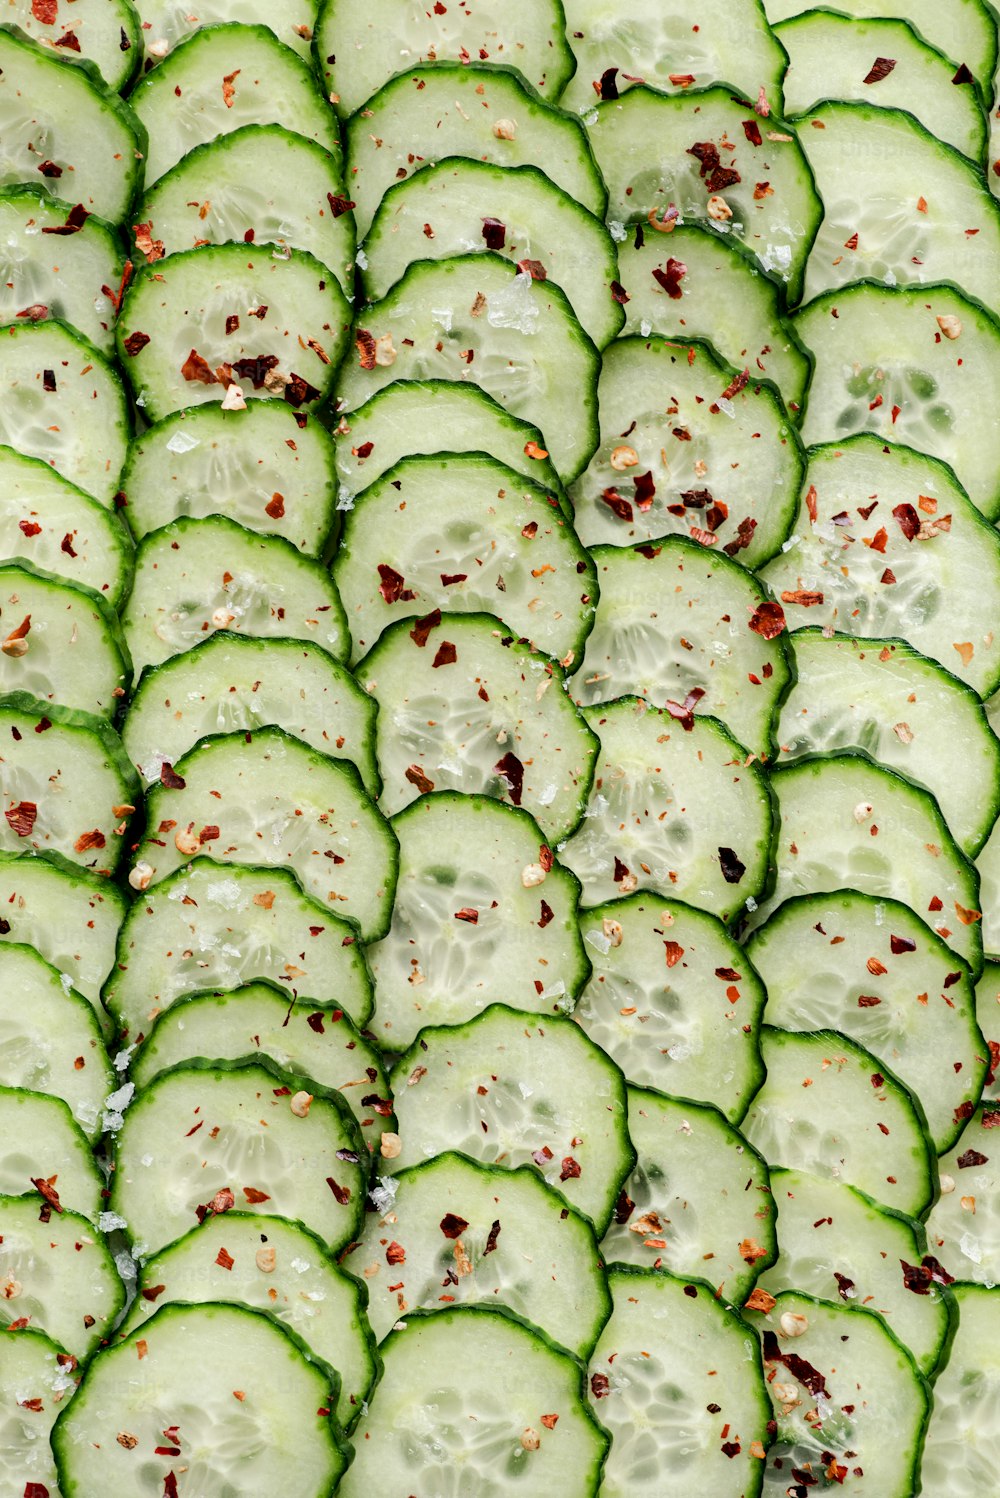 a close up of a tray of cucumber slices